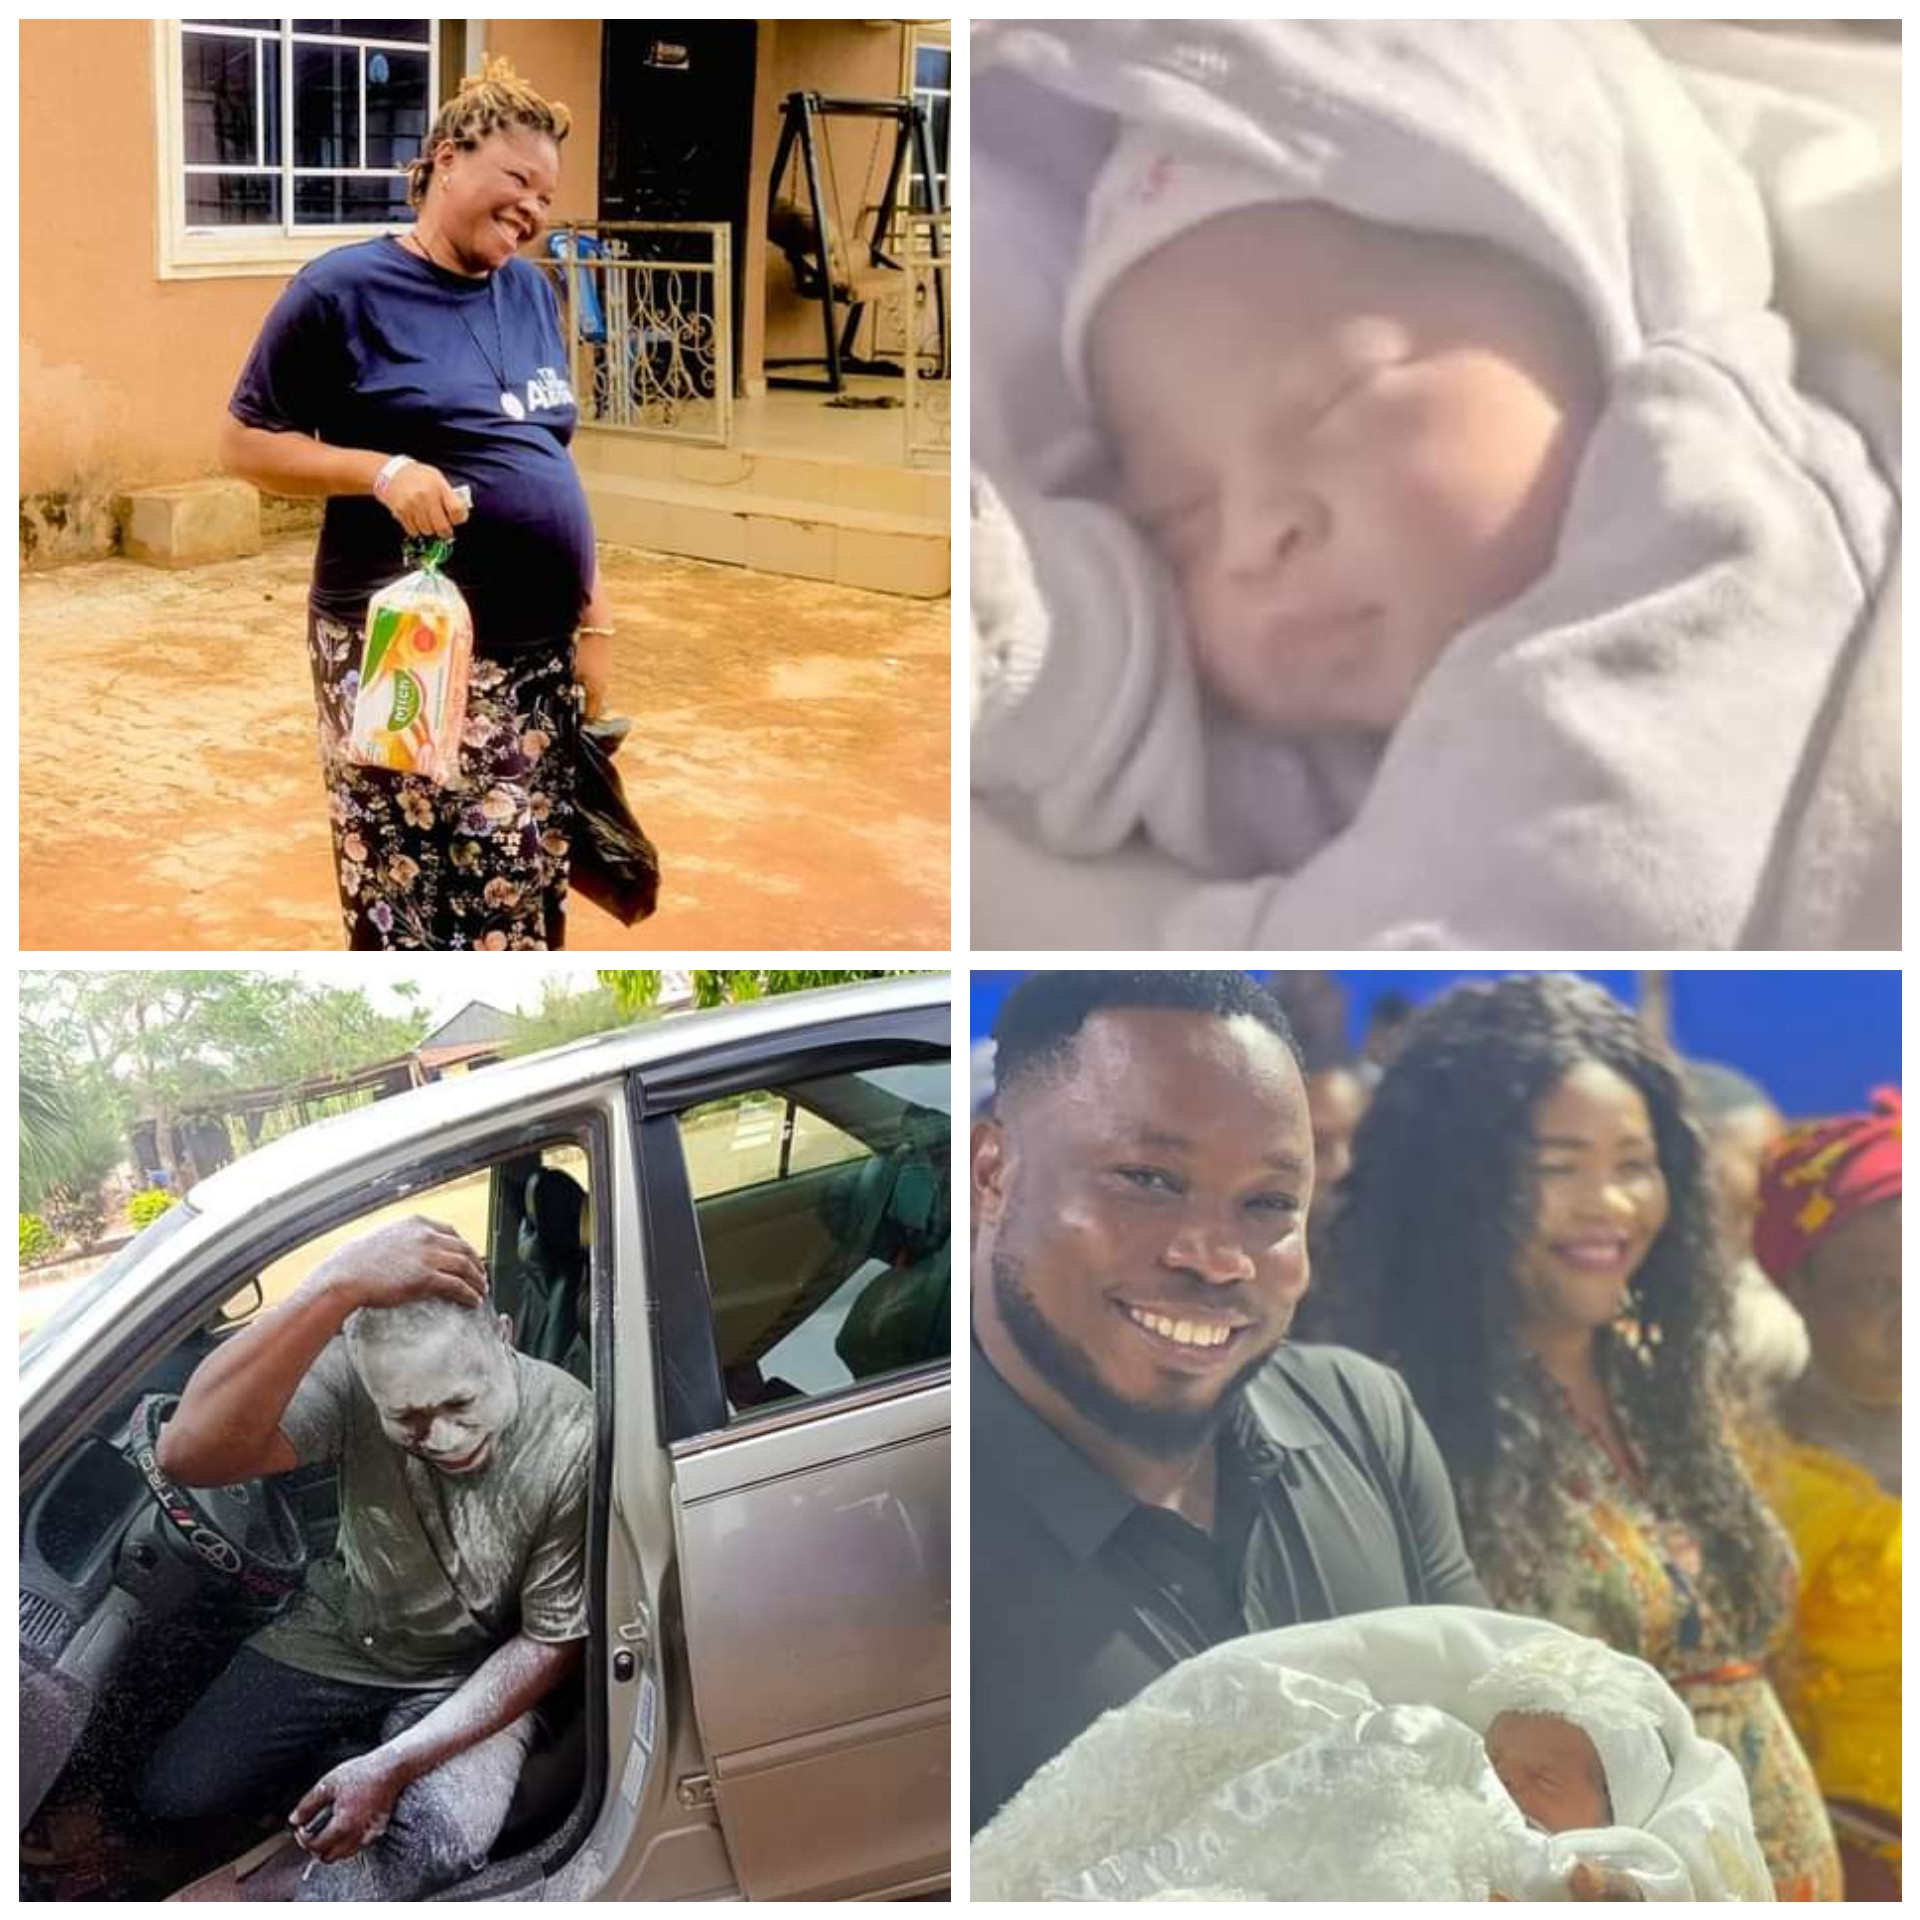 Nigerian Pastor celebrates becoming a father after 8 years